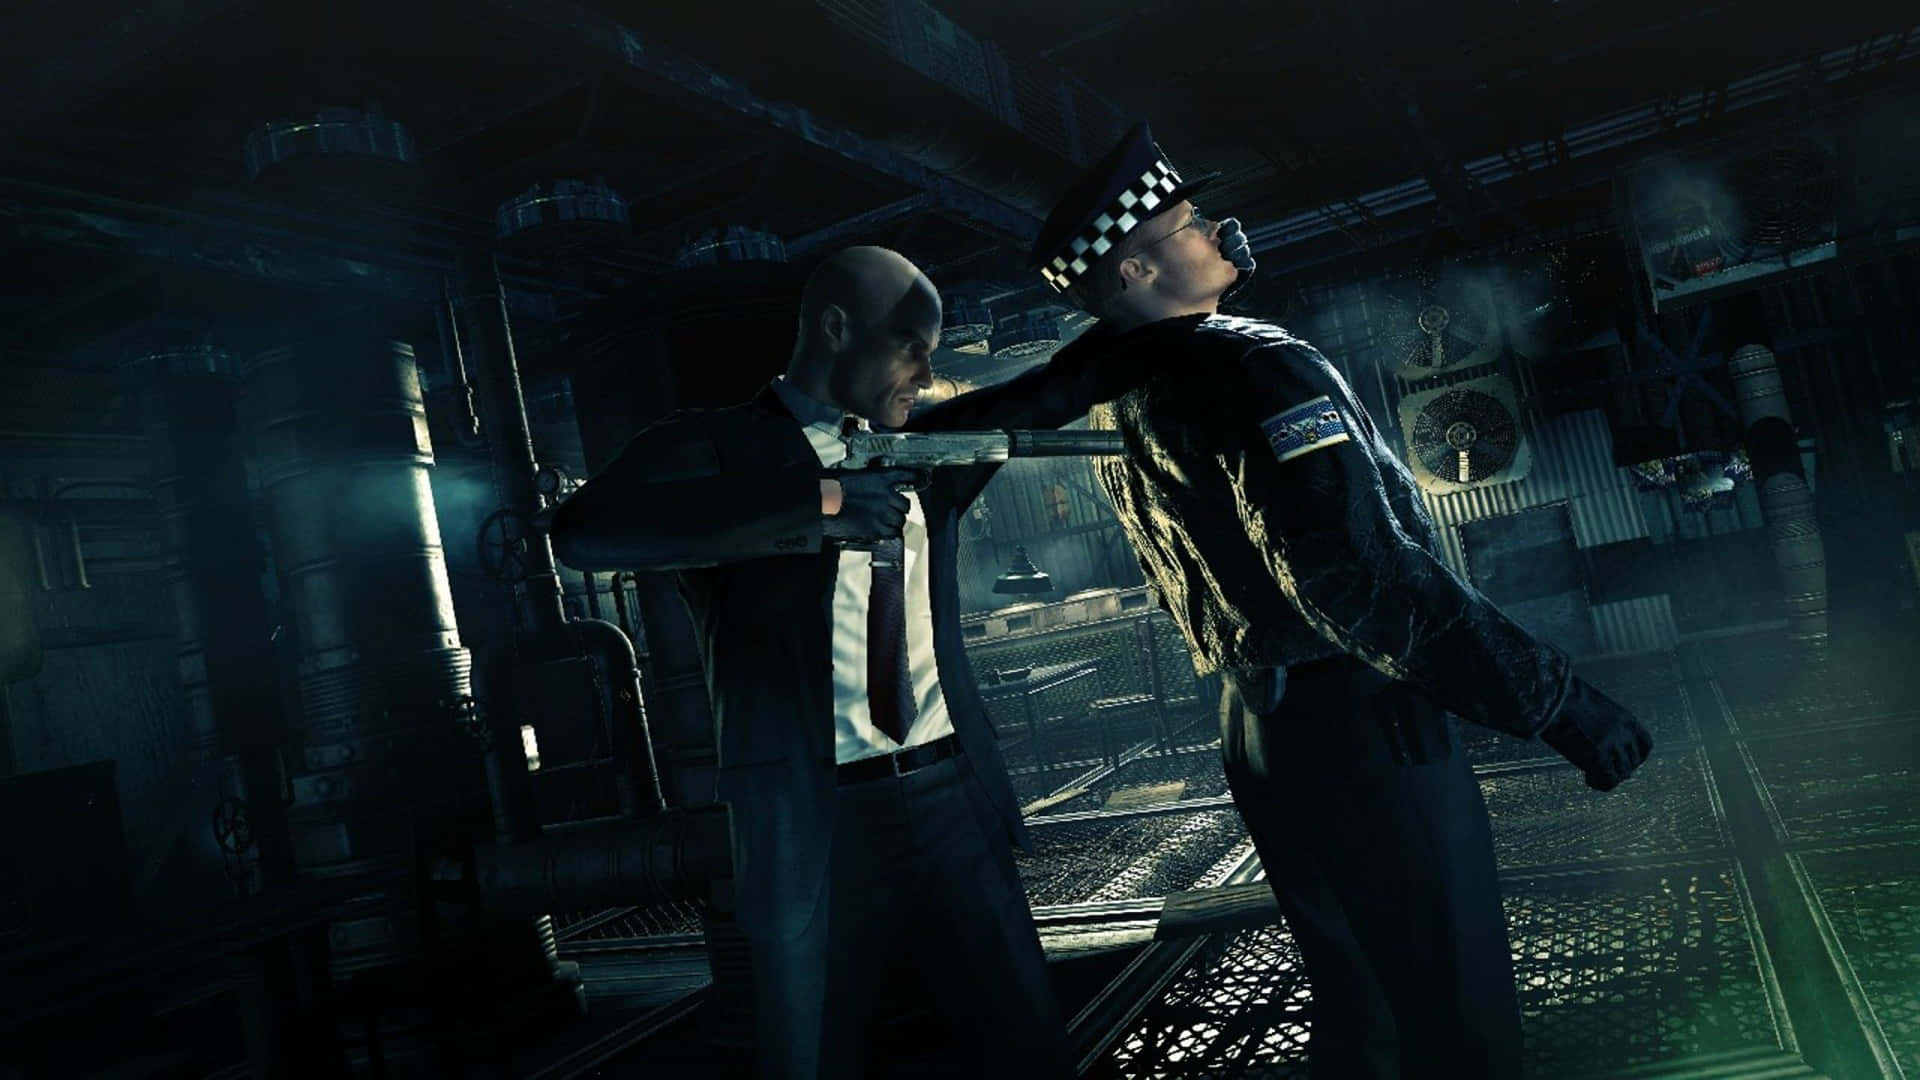 Giocacome Agente 47 In Hitman Absolution